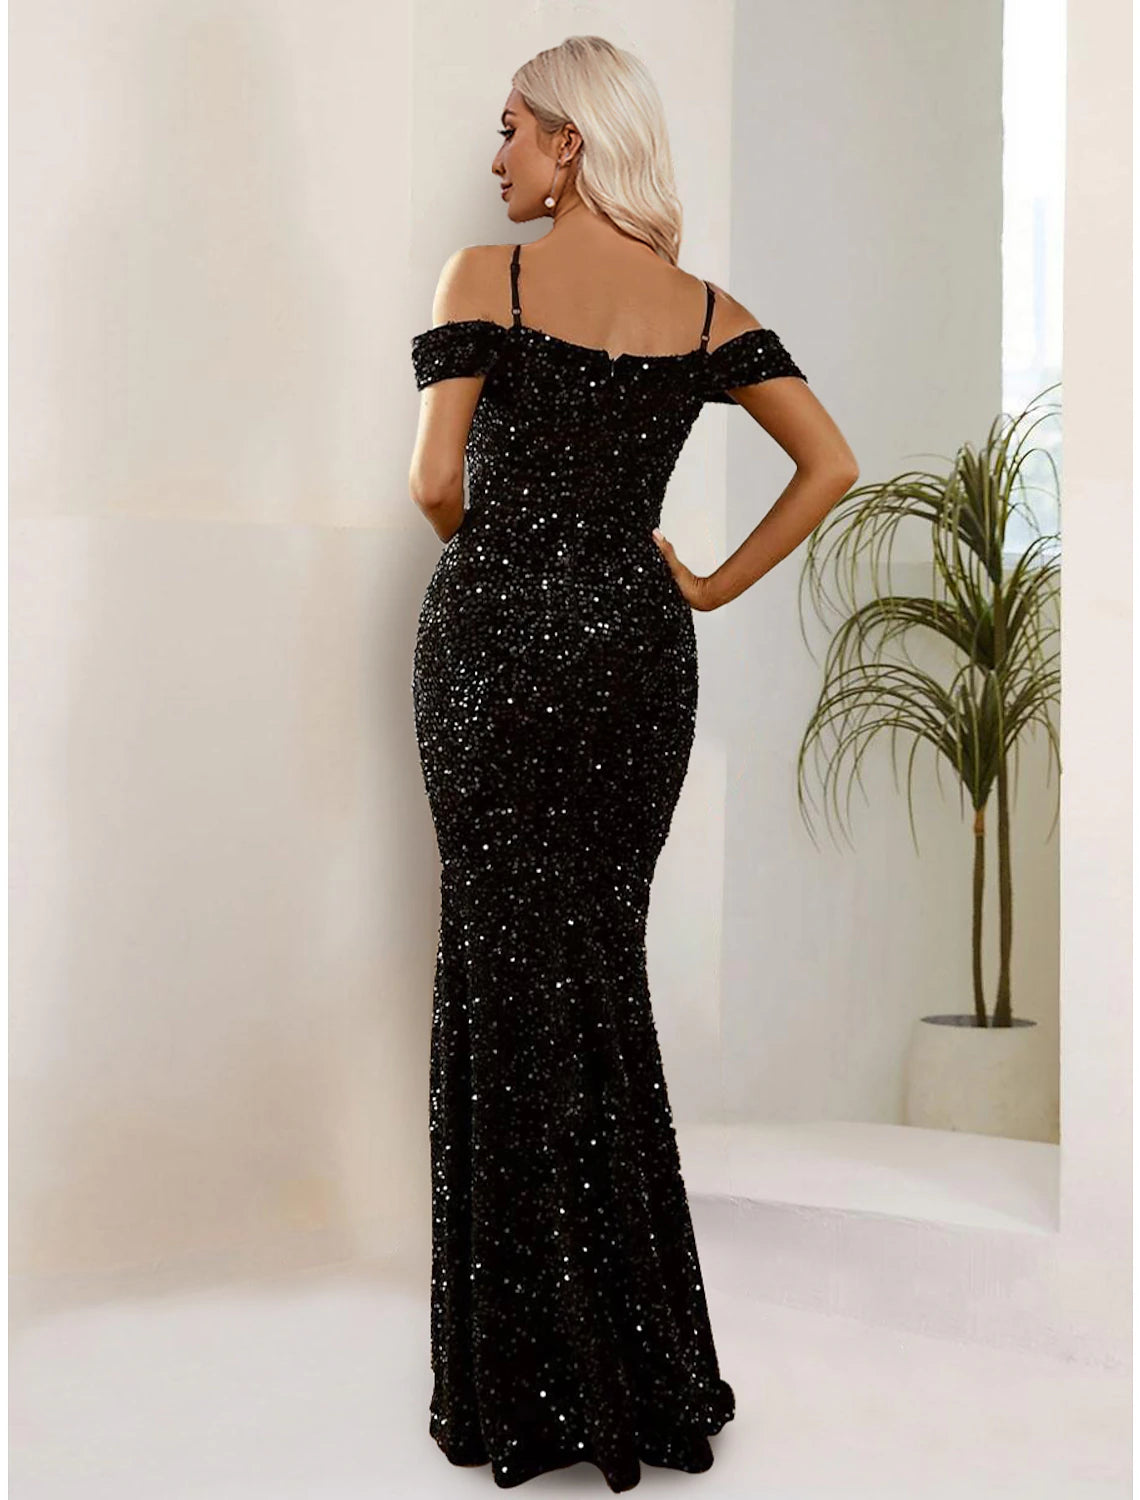 Mermaid / Trumpet Evening Gown Sparkle & Shine Dress Formal Black Tie Floor Length Short Sleeve Spaghetti Strap Sequined with Sequin